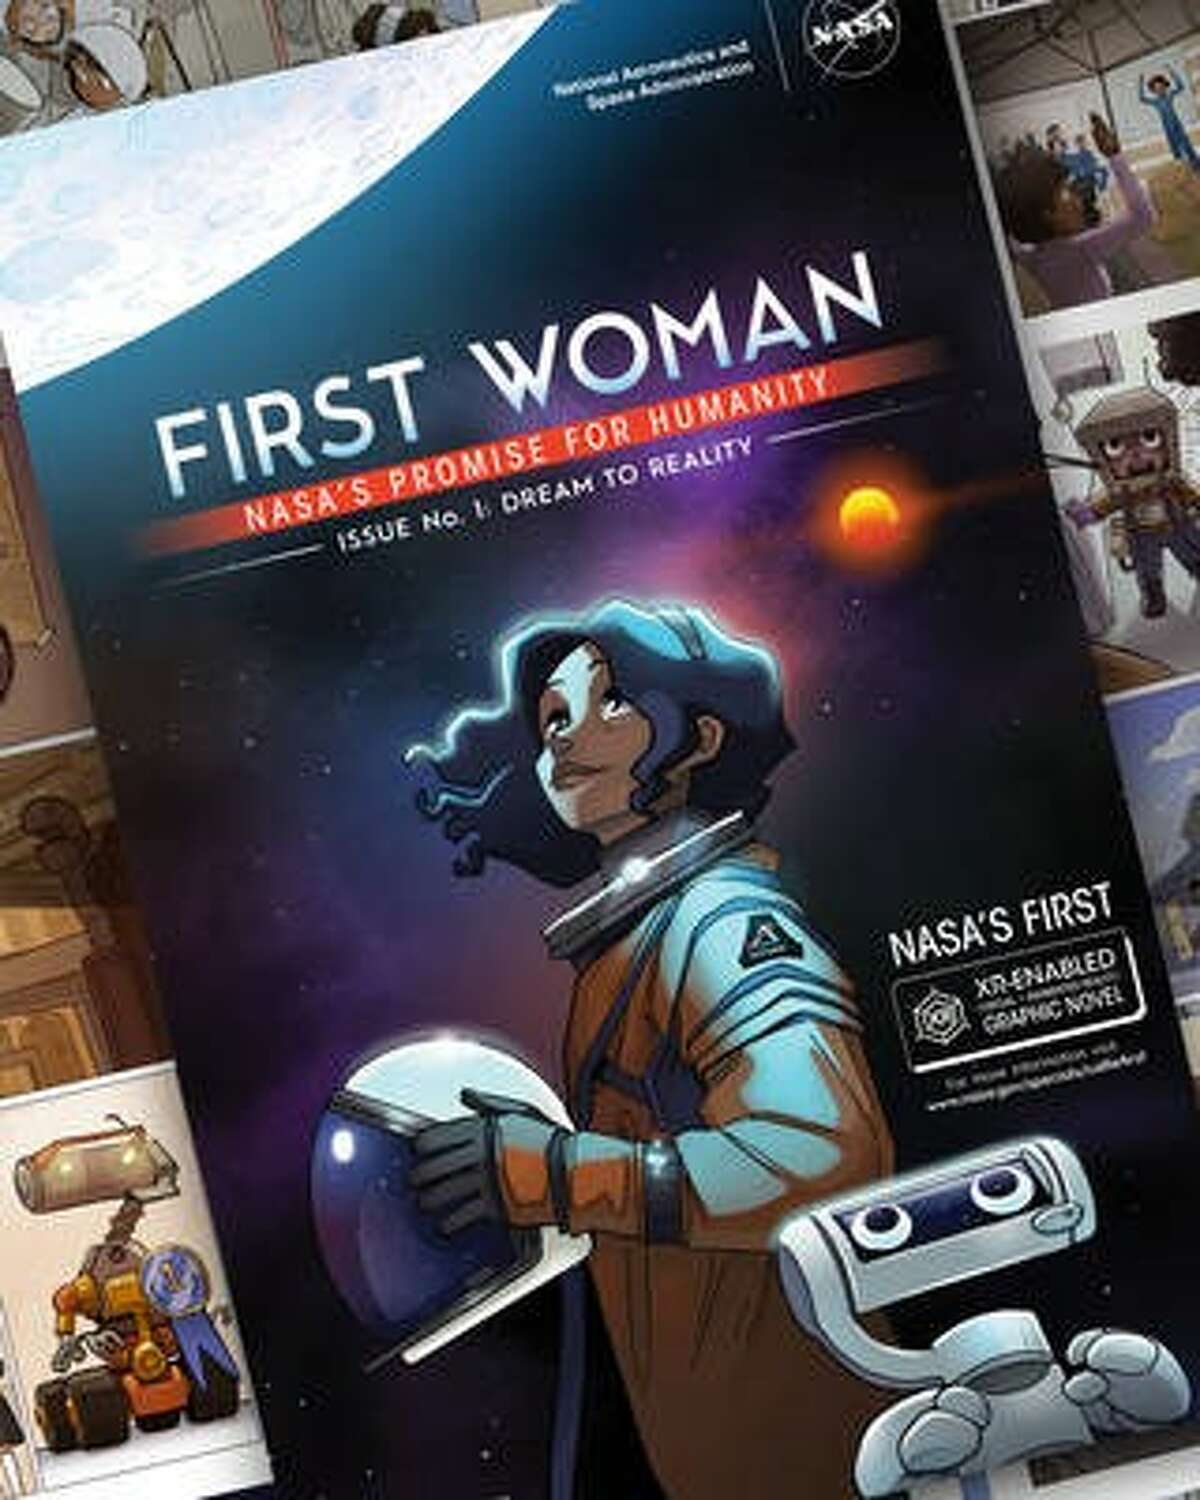 NASA has created a graphic novel around fictional character Callie Rodriguez. Issue 1, “Dream to Reality,” imagines Callie's trailblazing path as the first woman on the Moon. 